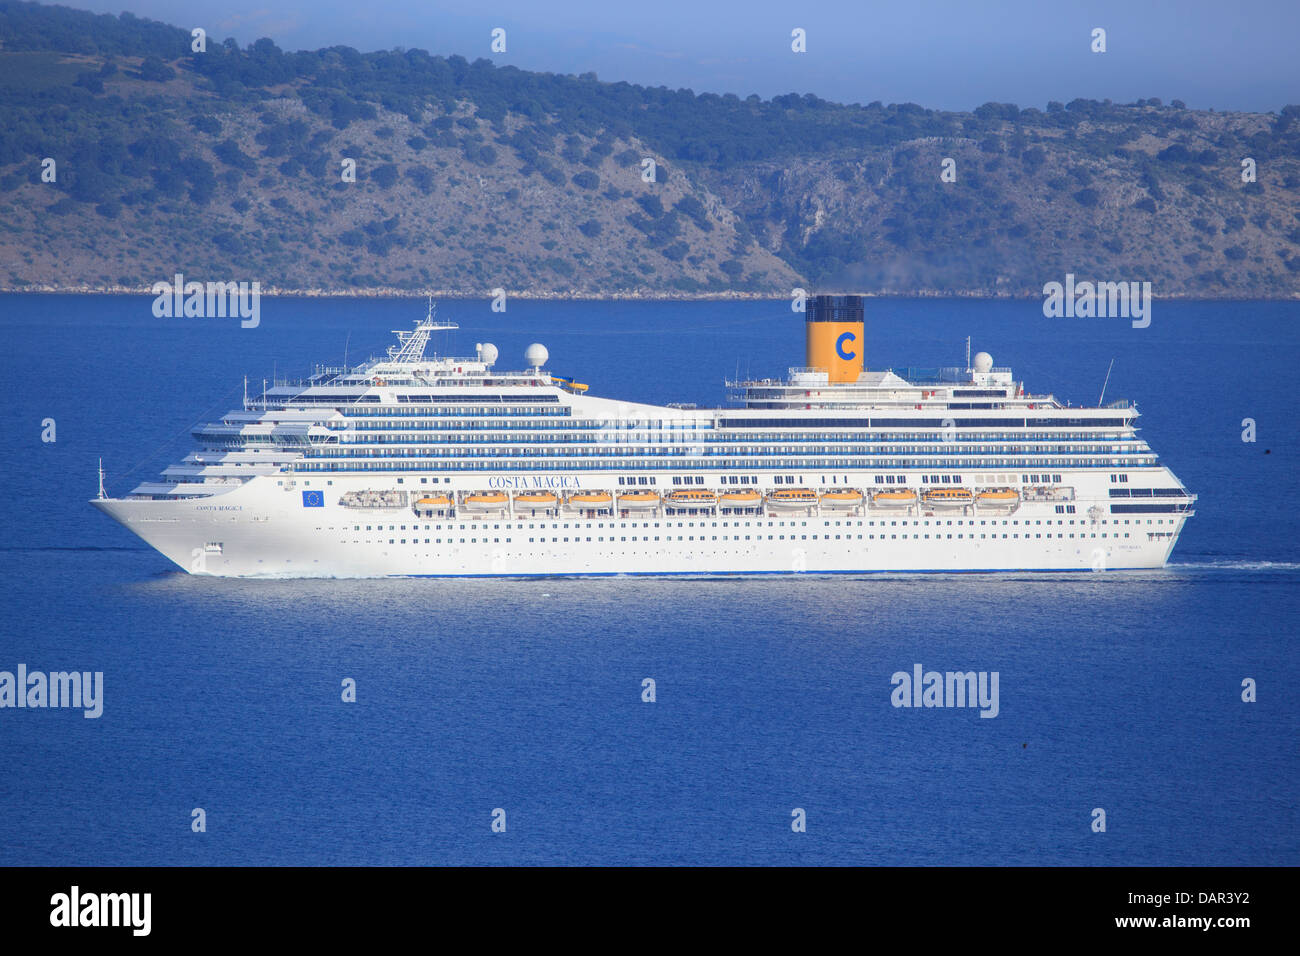 The cruise ship Costa Magica sailing in the straits between Corfu and Albania Stock Photo